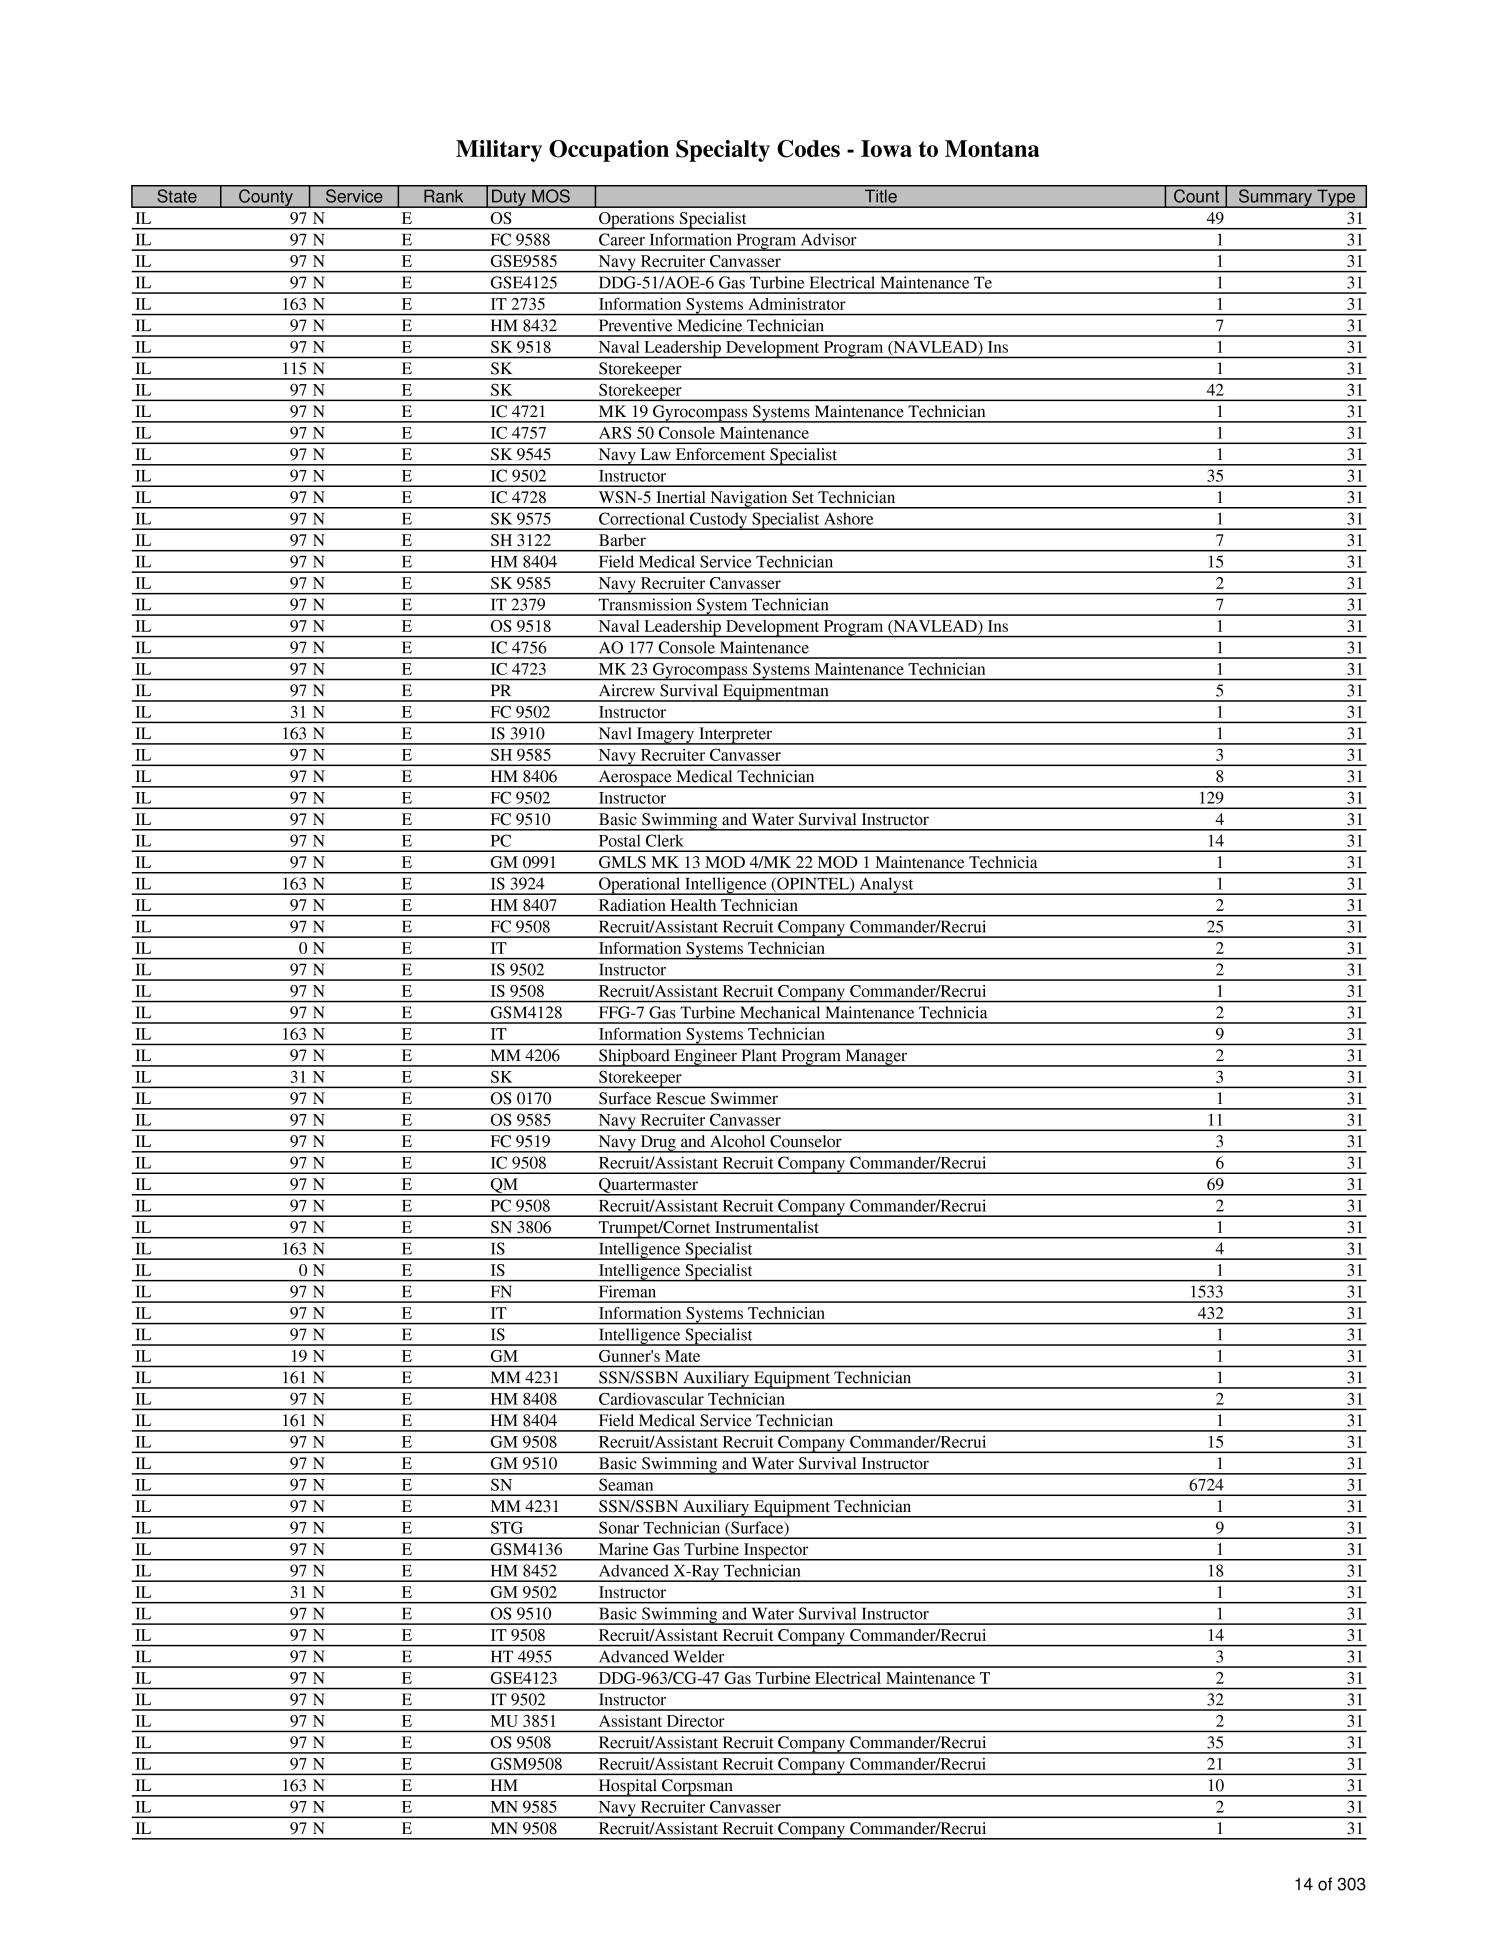 list-of-military-occupation-specialty-codes-mos-by-state-and-county-page-303-of-1-684-unt